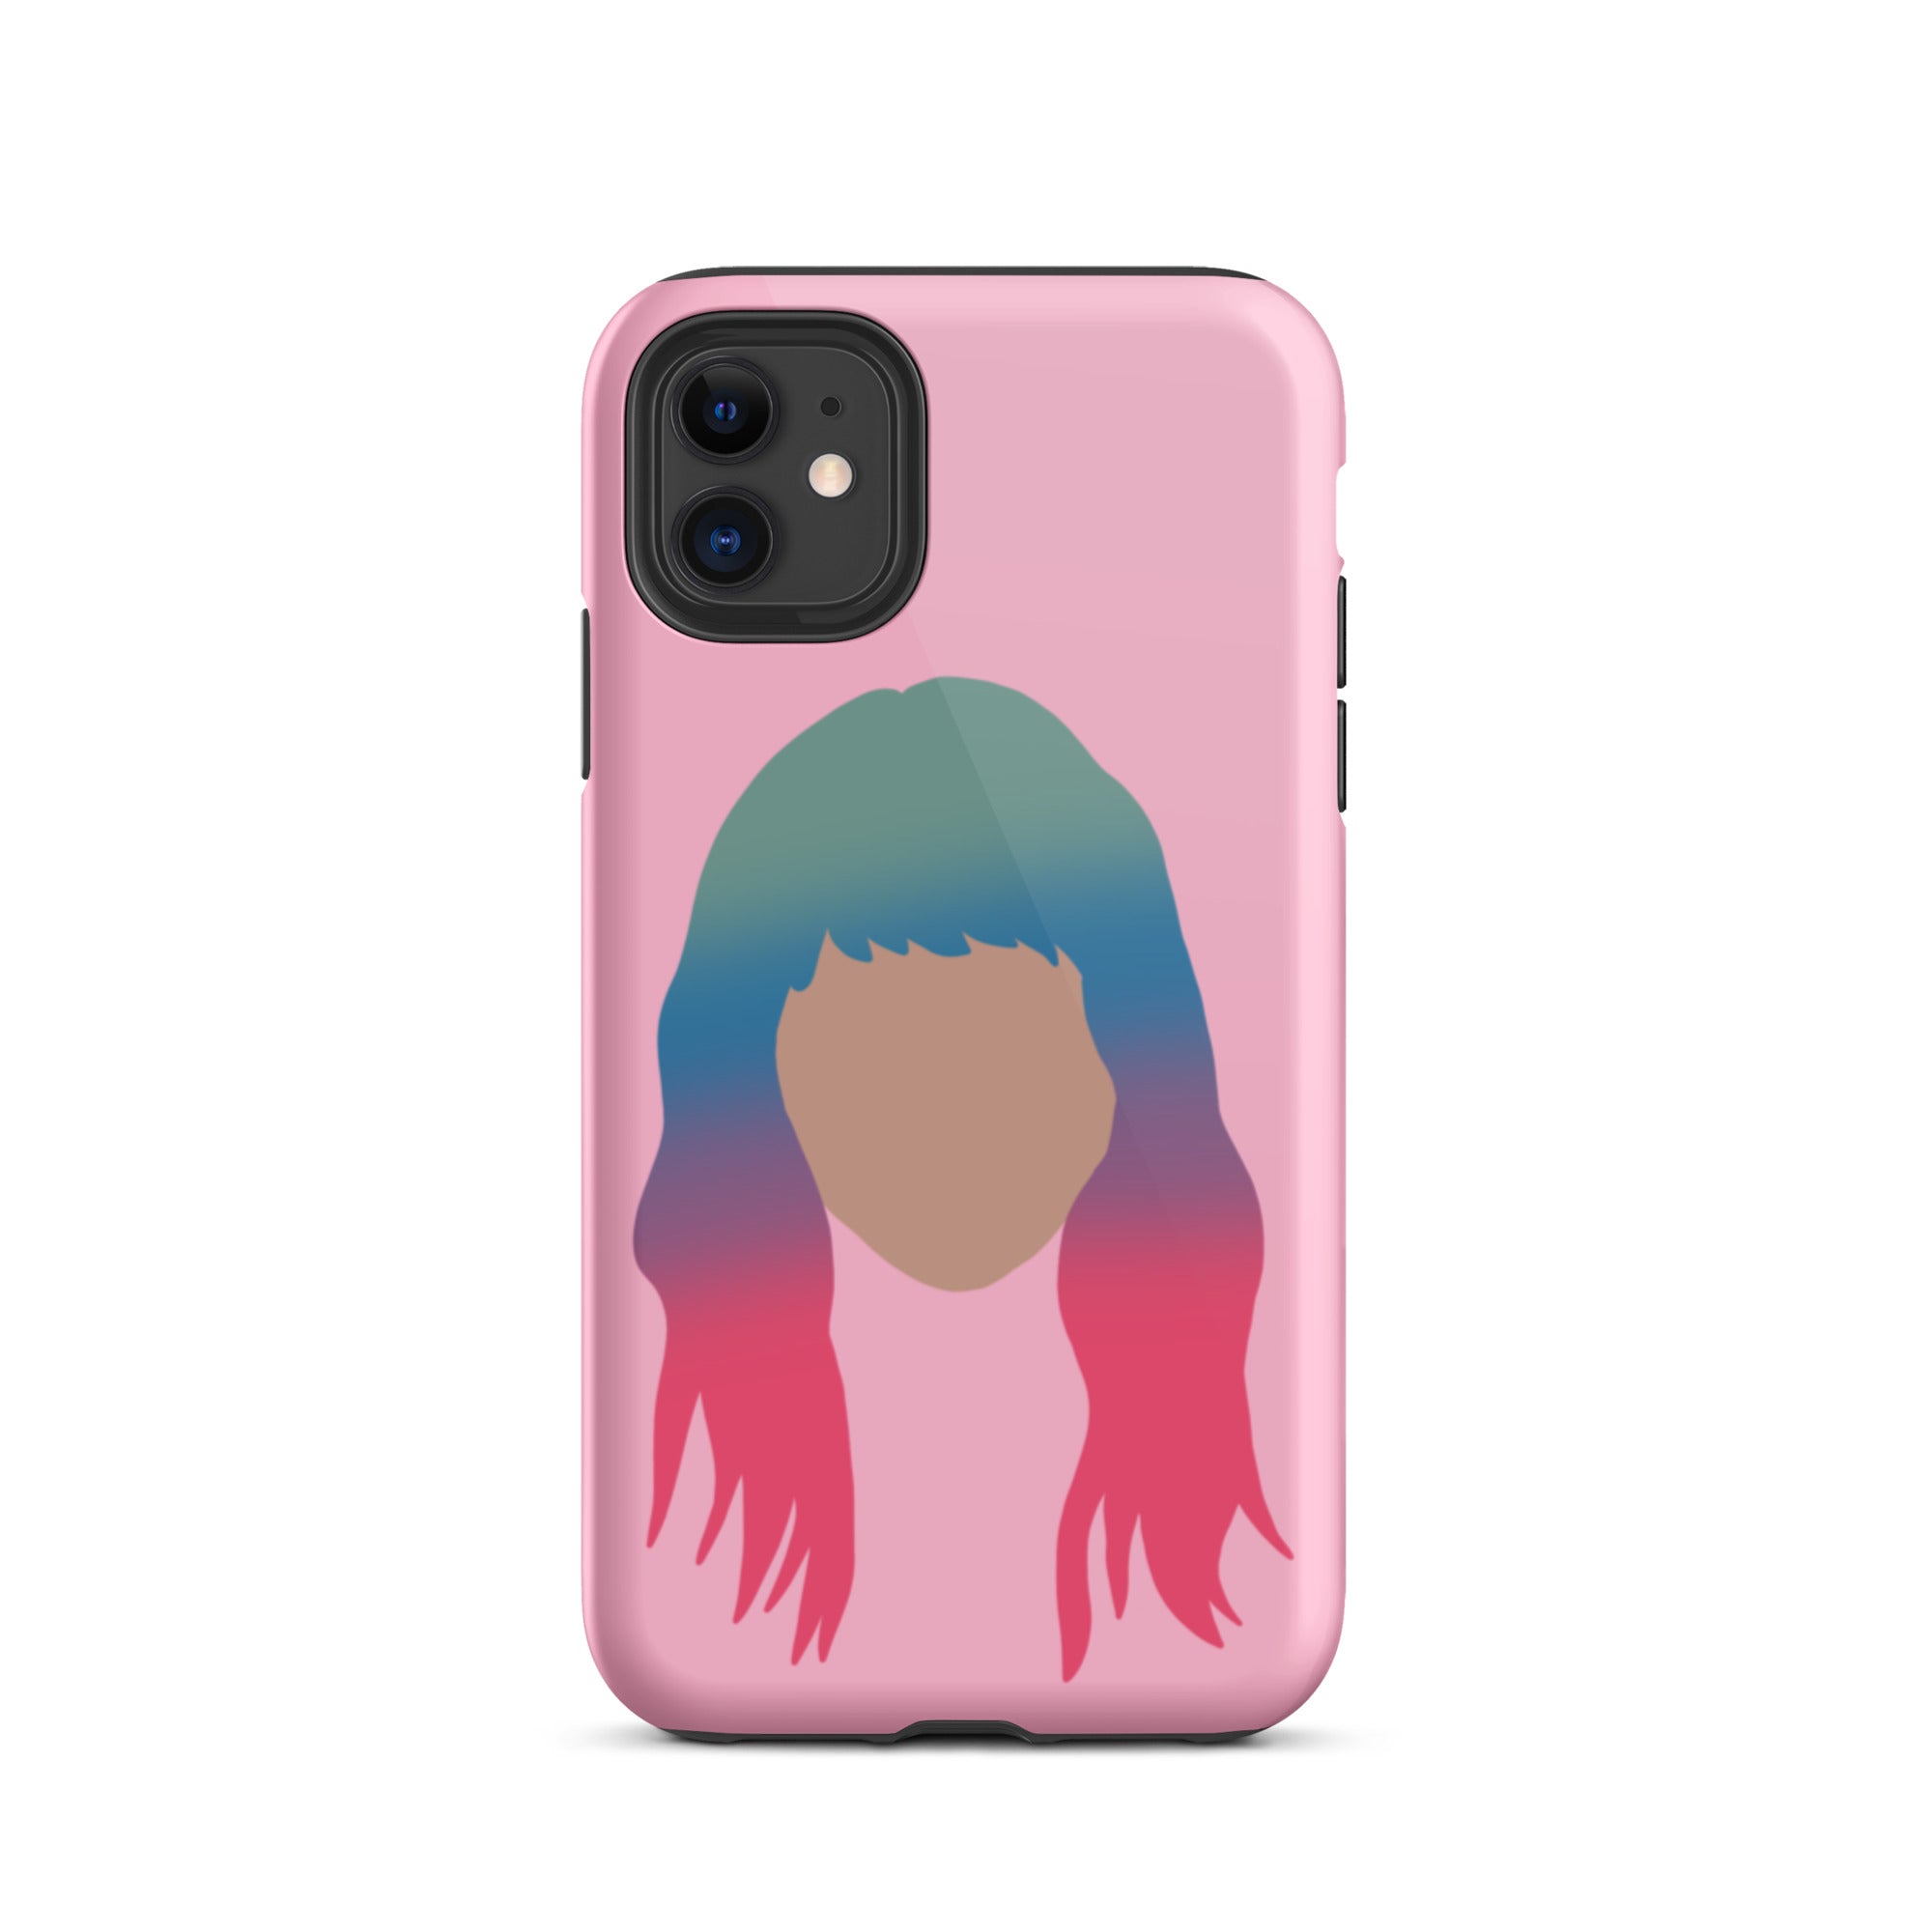 Bisexual Wig (You Need To Calm Down) Tough iPhone Case